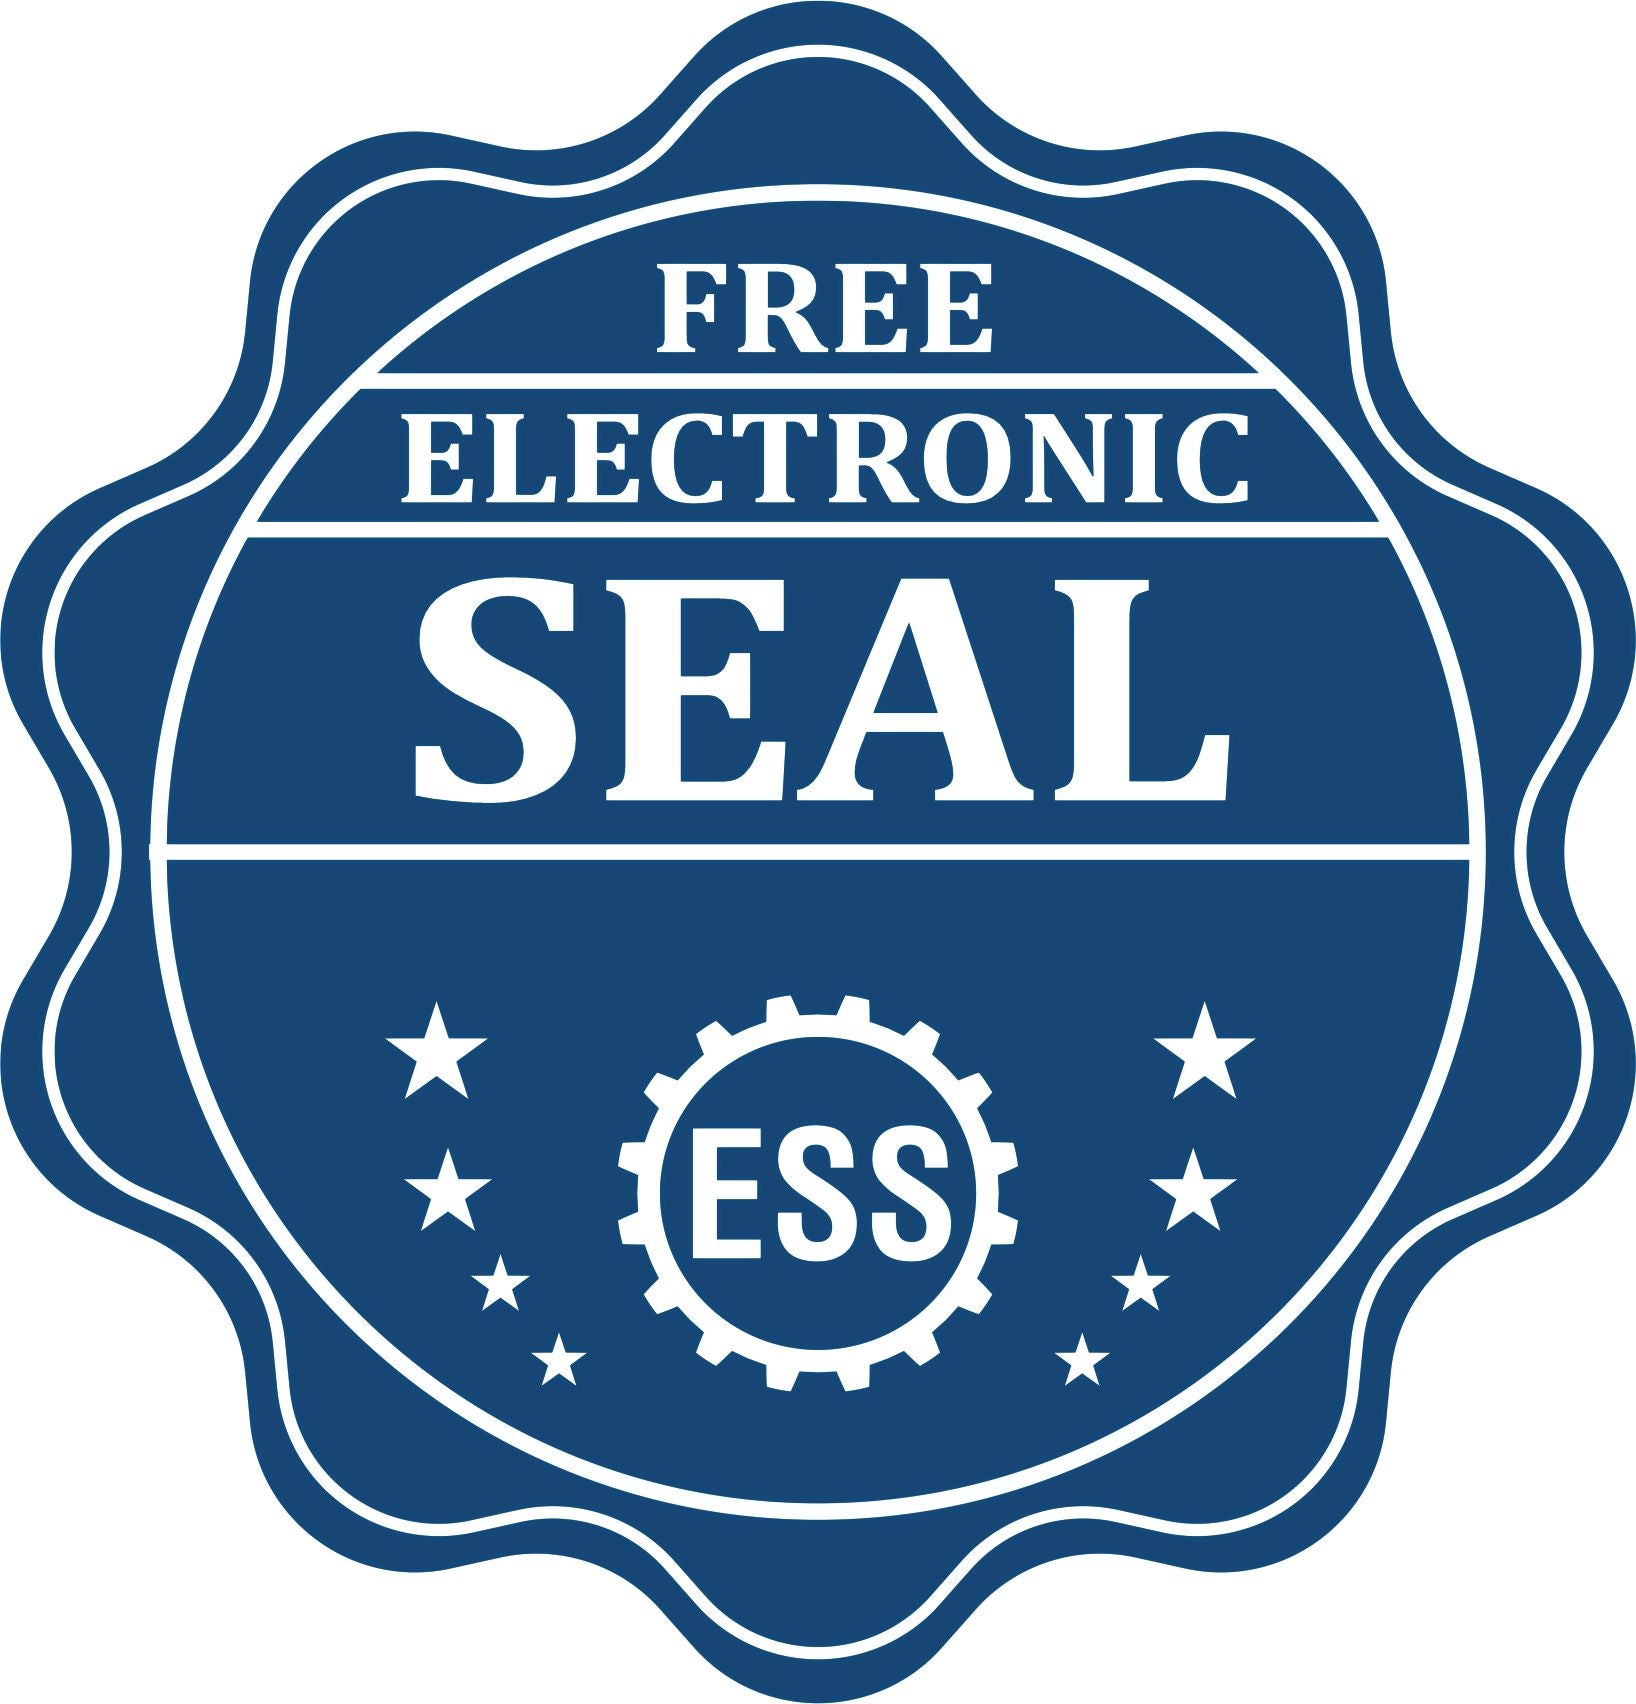 A badge showing a free electronic seal for the Heavy Duty Cast Iron Hawaii Engineer Seal Embosser with stars and the ESS gear on the emblem.